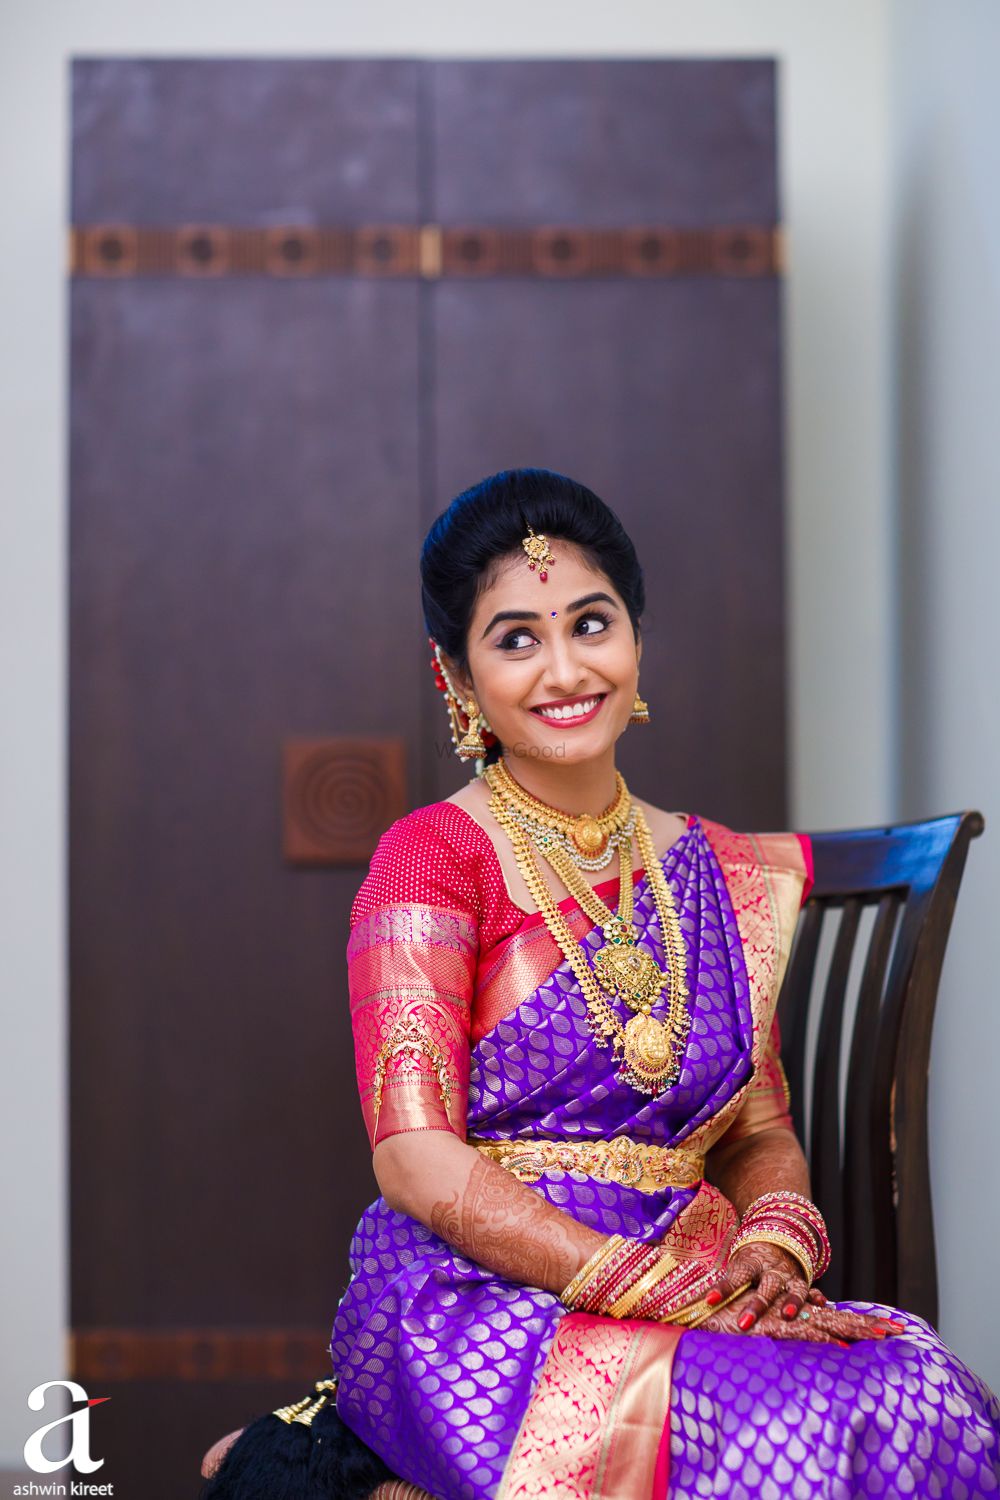 Photo of South Indian bridal look with red and purple kanjivaram